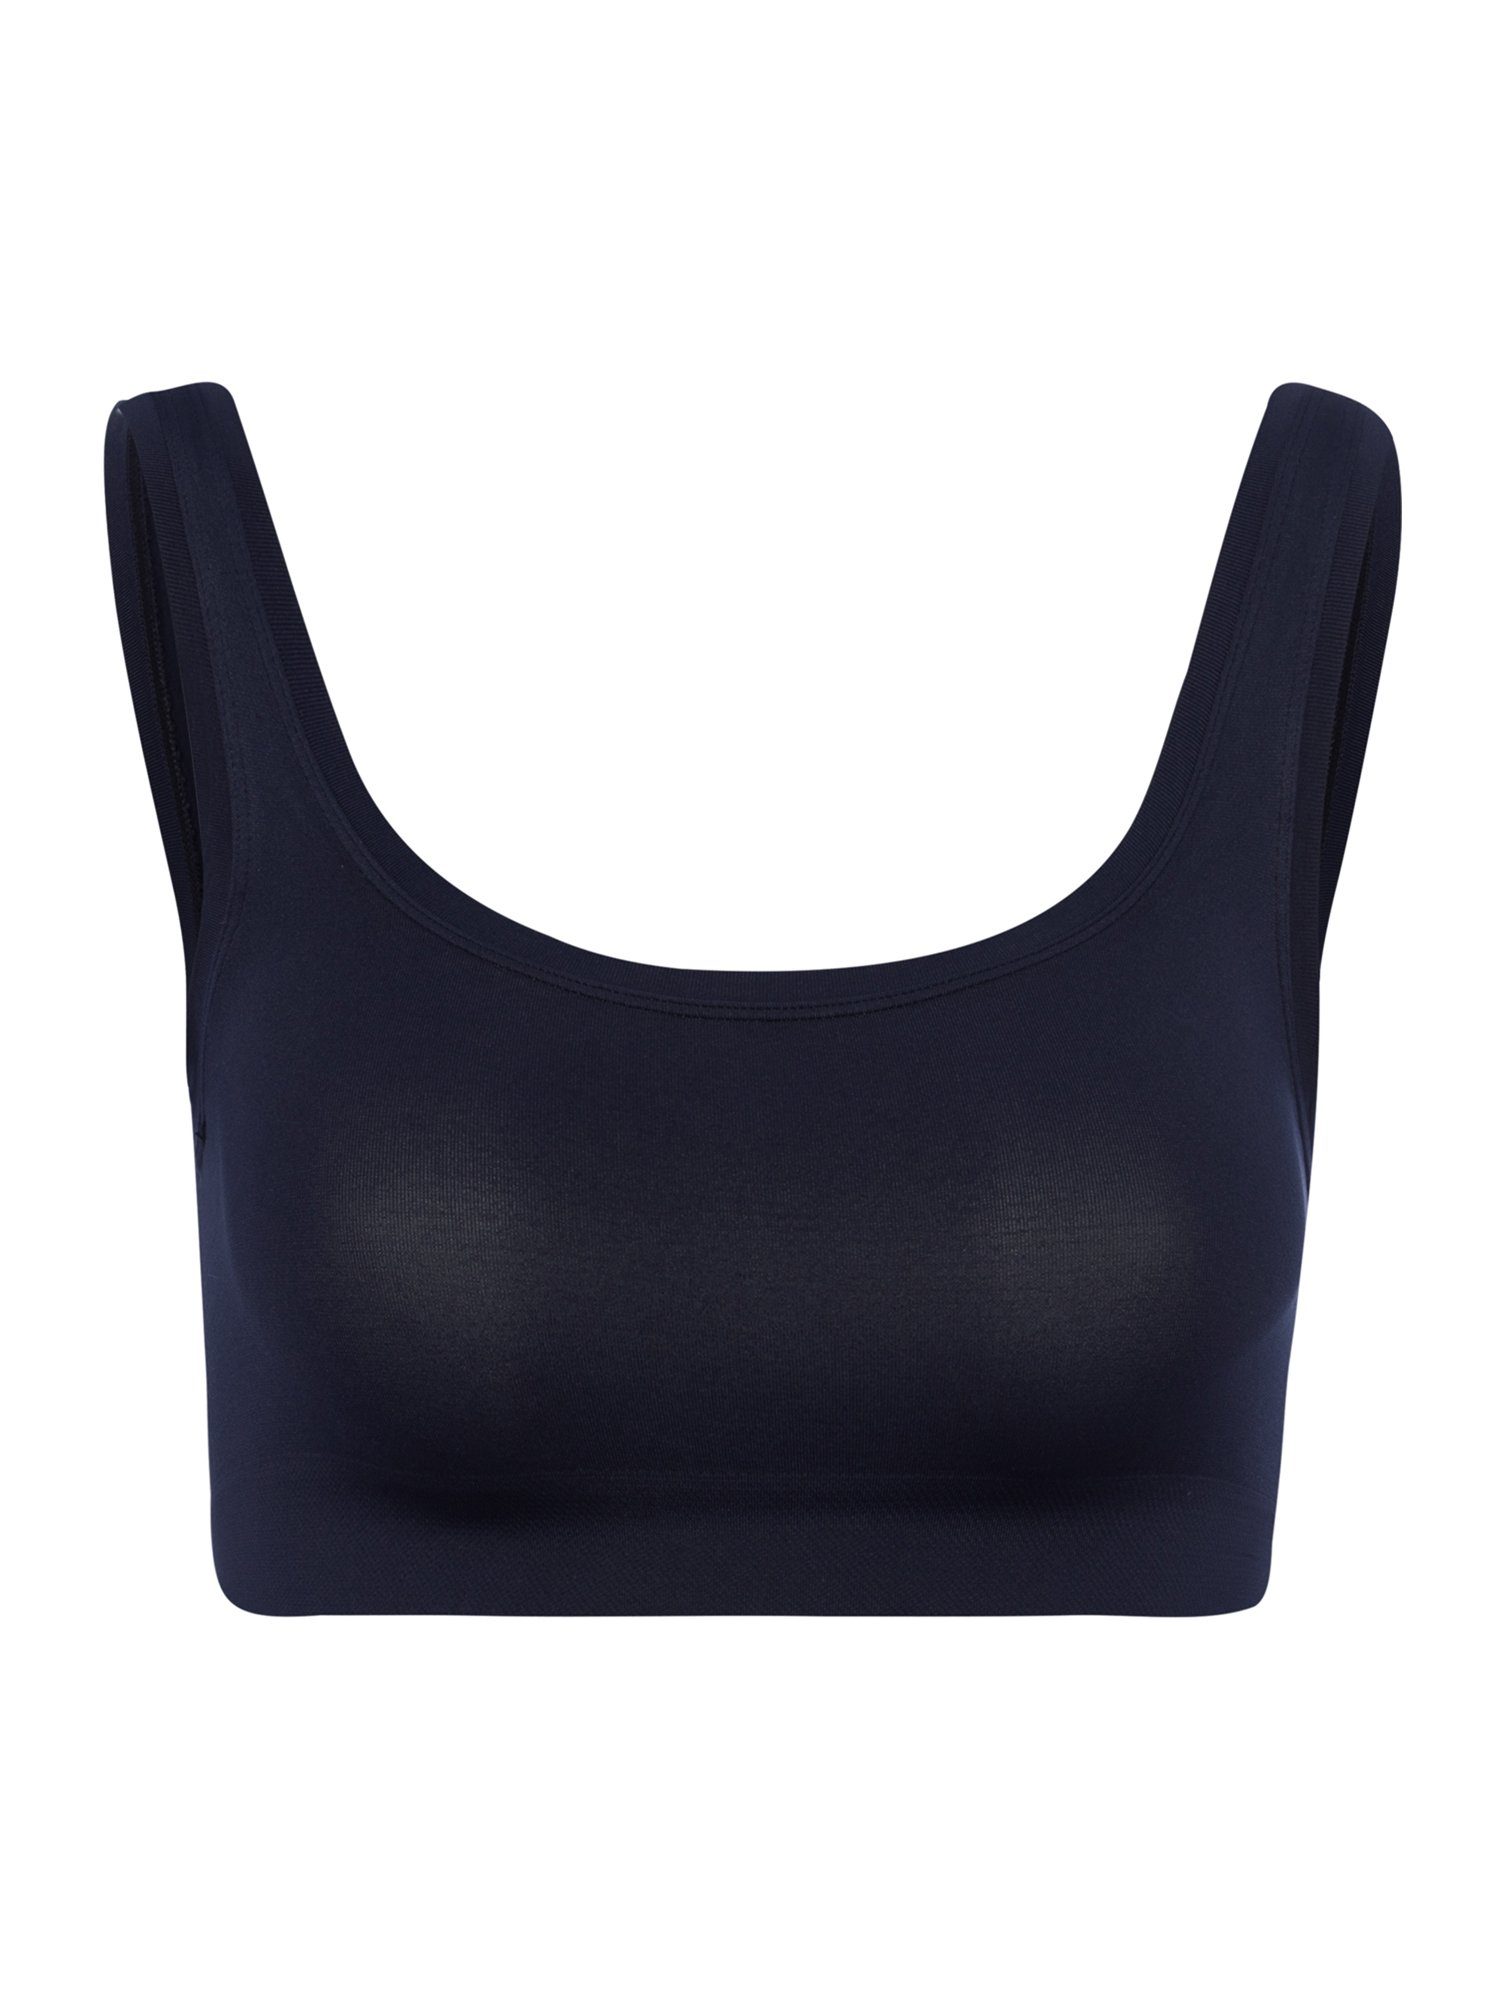 Hanro Bustier Touch Feeling deep navy | Bustiers